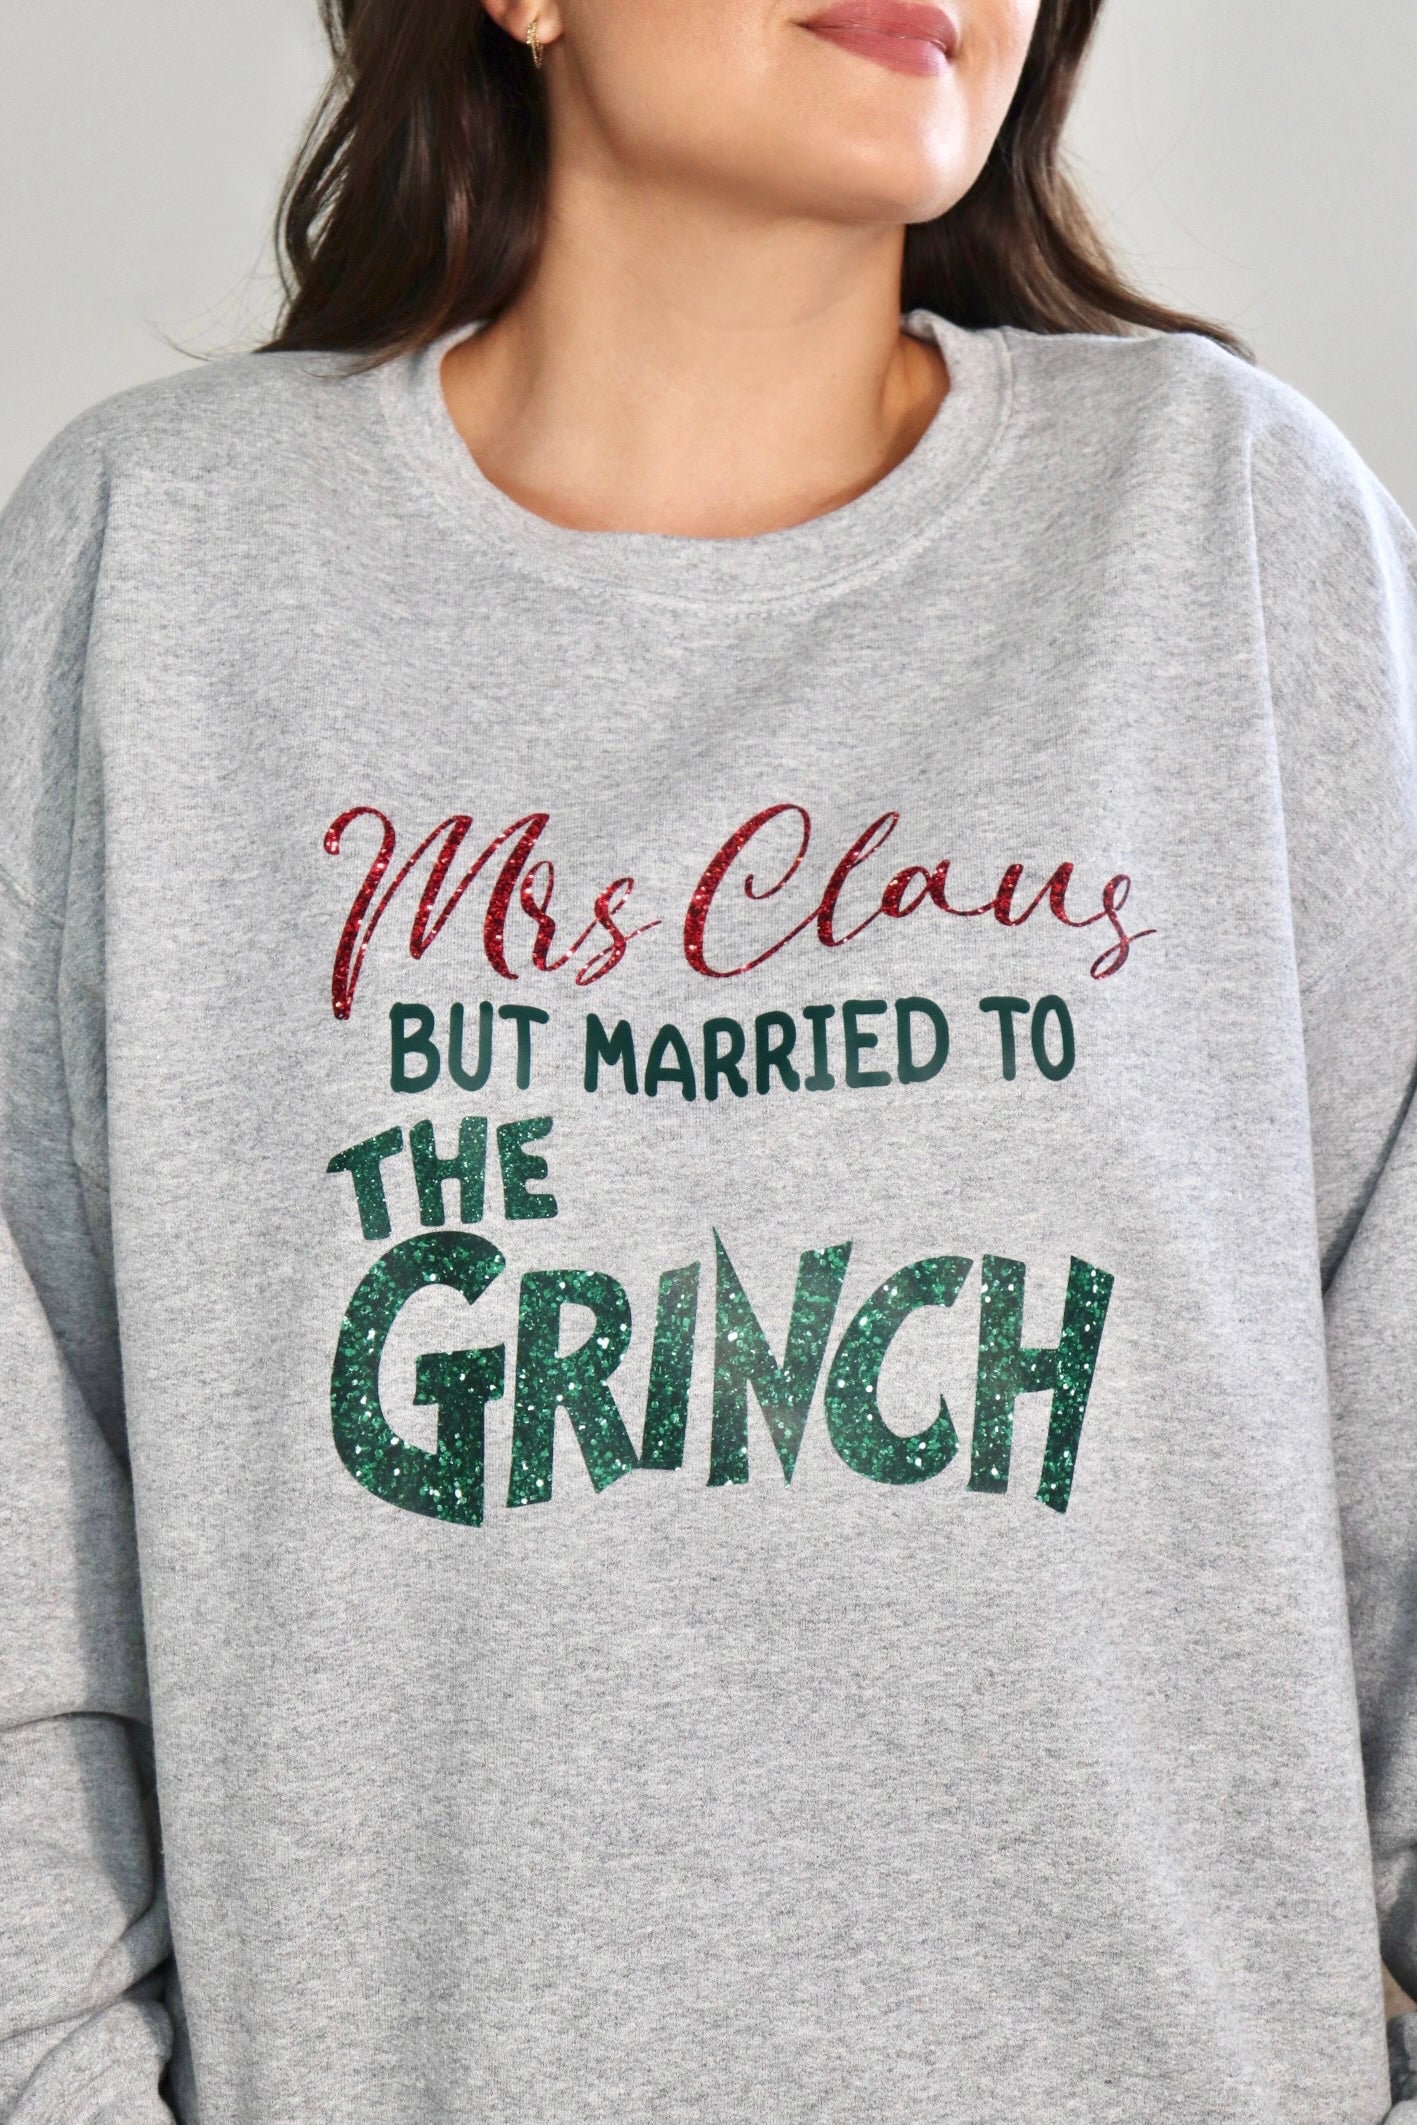 MRS. CLAUS MARRIED TO THE GRINCH SWEATSHIRT